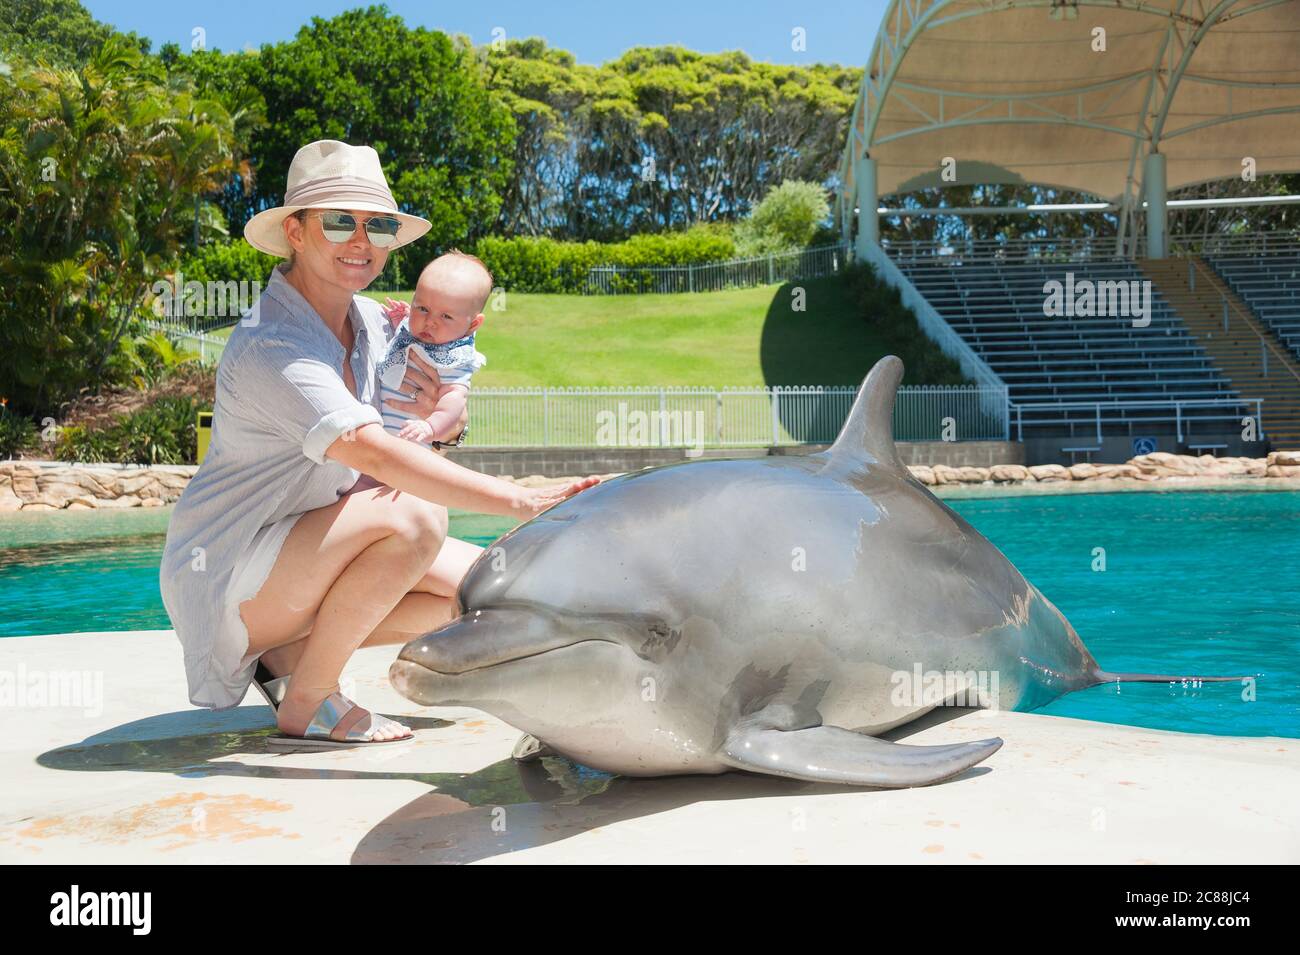 Tourist mother and baby patting a beached dolphin at the dolphin display pool at Sea World on the Gold Coast, Queensland Australia. Stock Photo